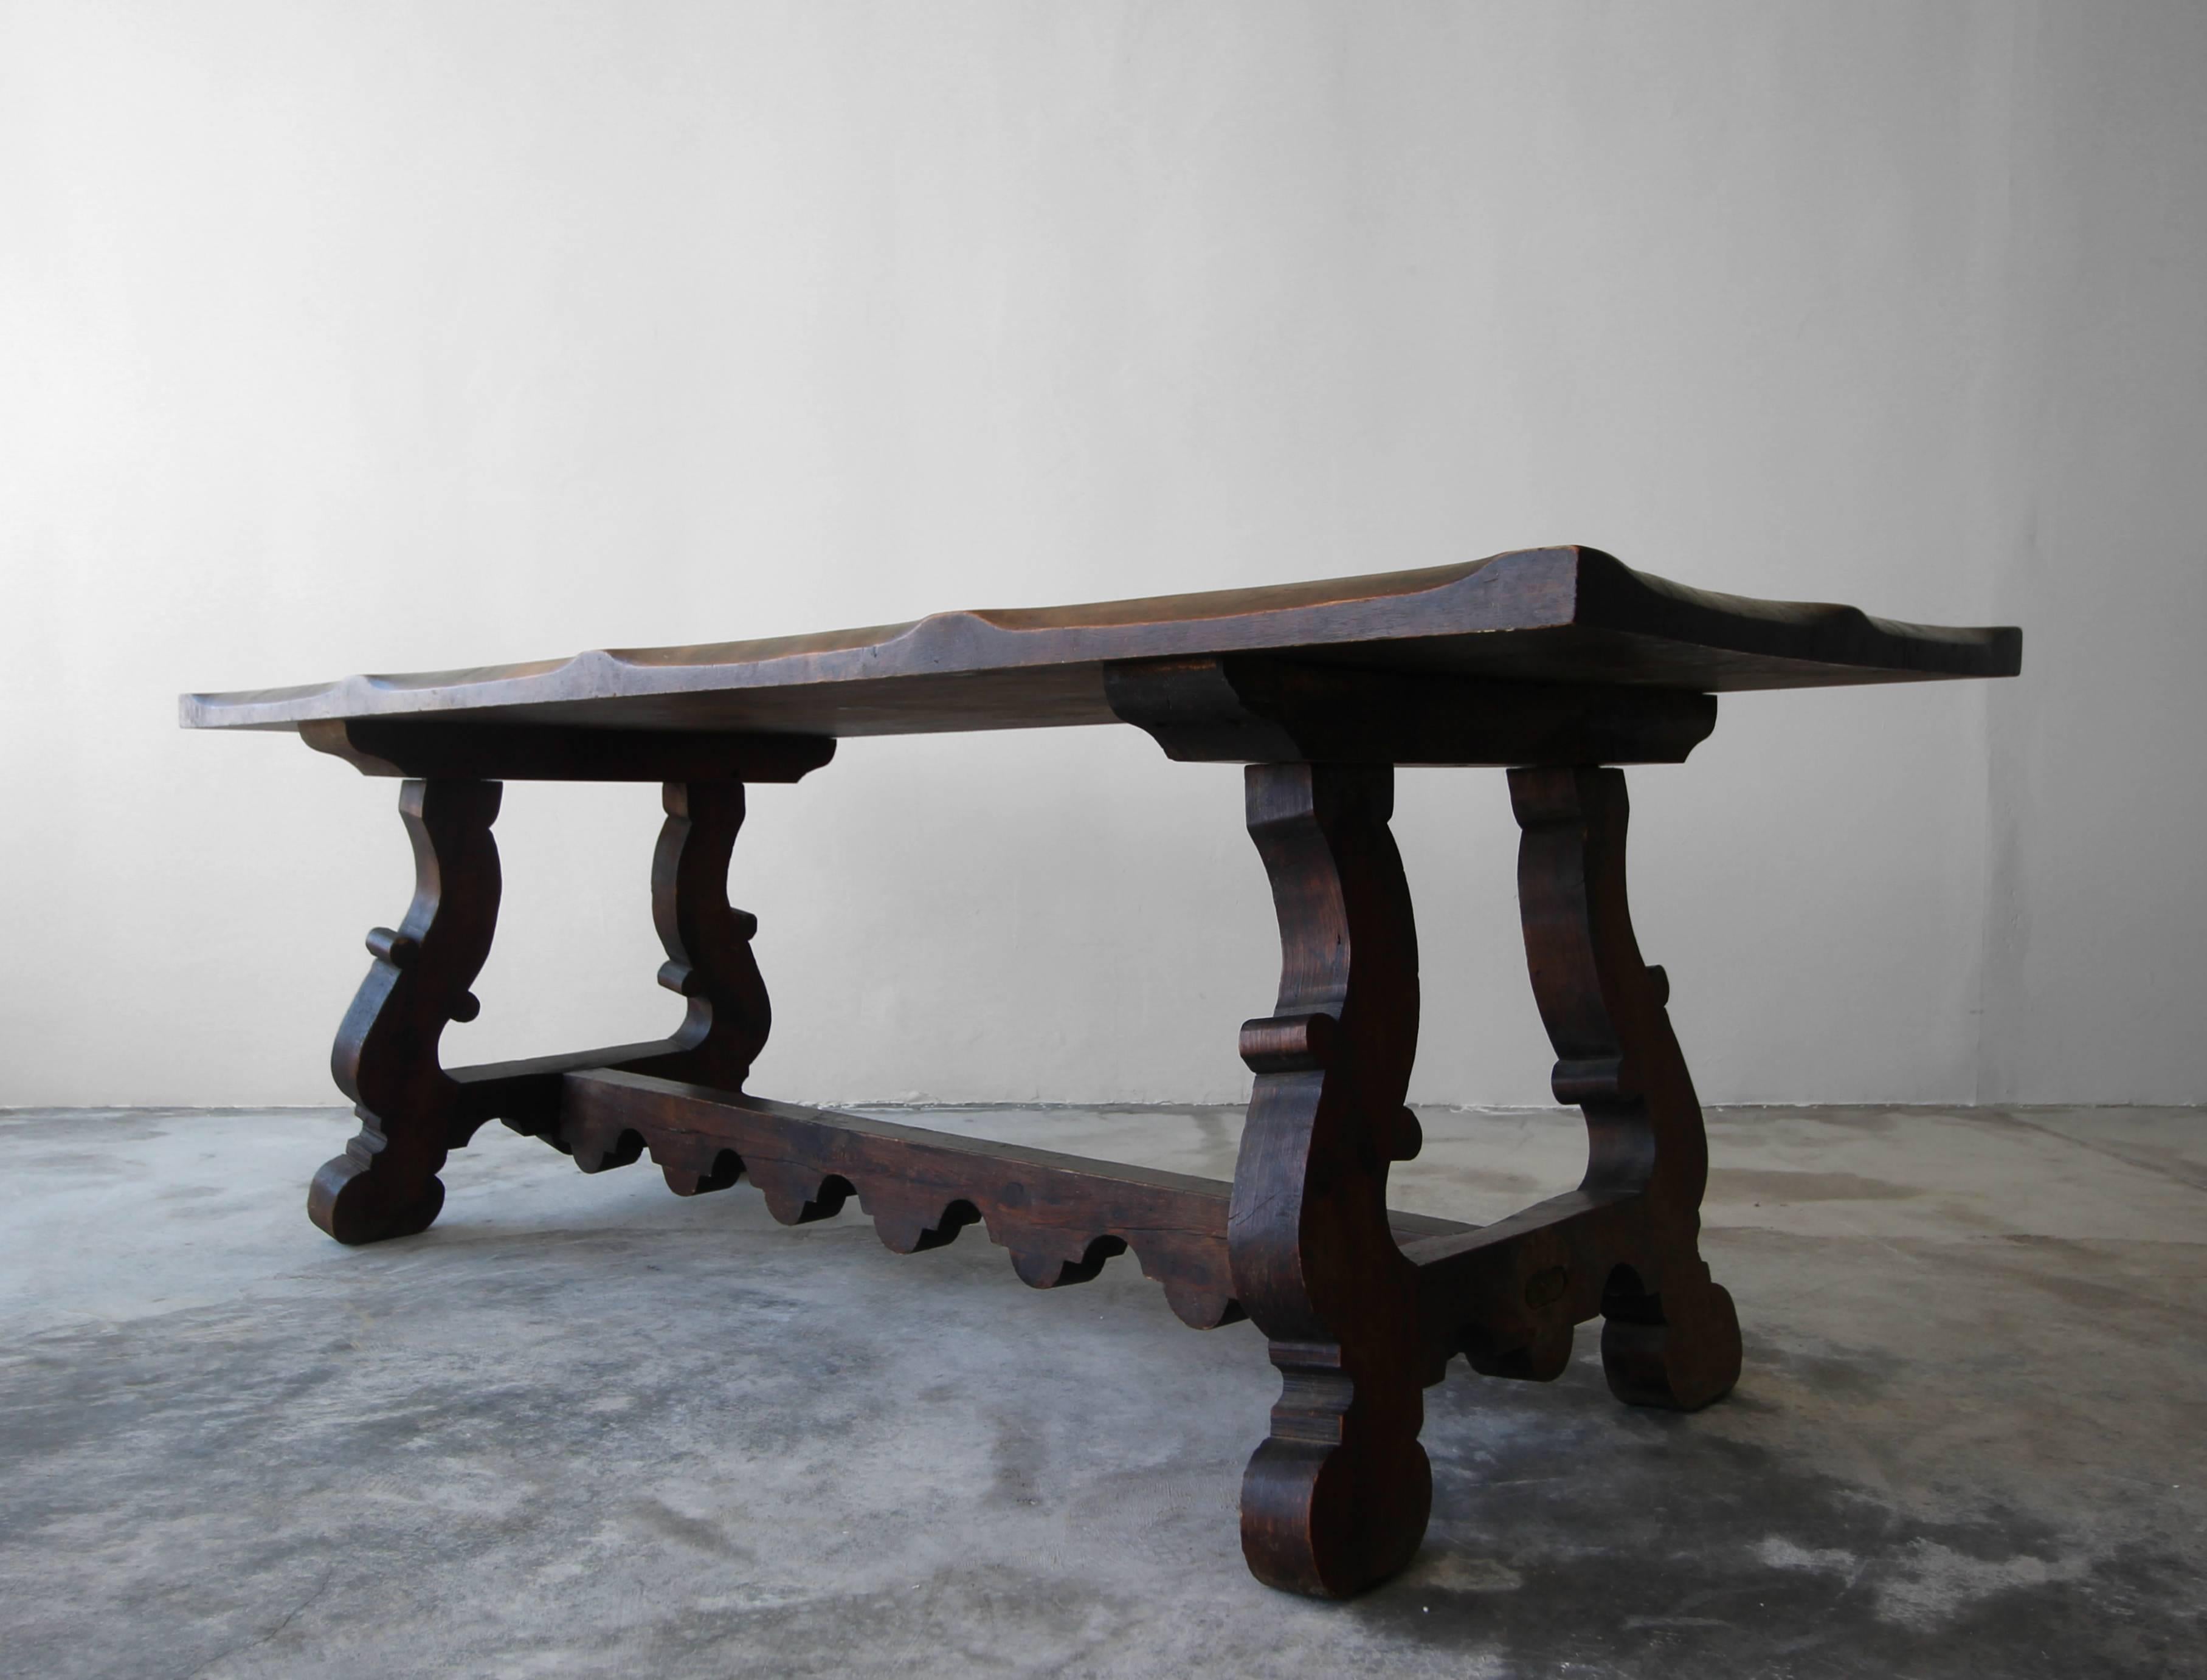 Beautiful piece with beautiful patina. This antique Spanish dining table has all the character a piece of this nature should. Constructed out of solid wood with a unique scalloped edge and carved trestle base. This truly is a stunning table in this